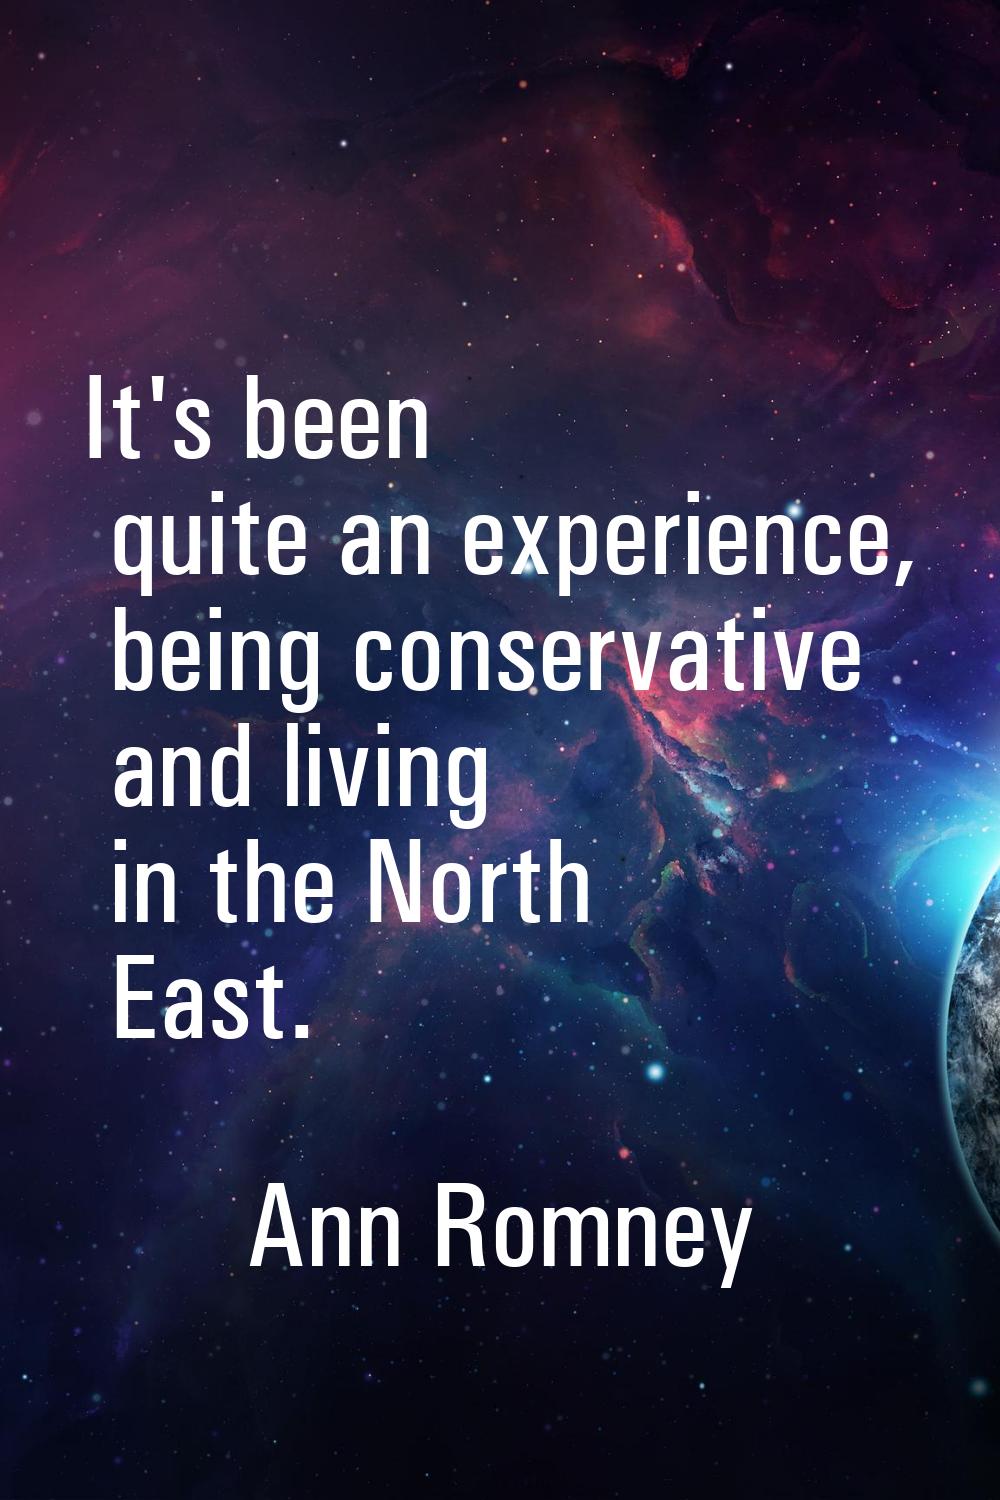 It's been quite an experience, being conservative and living in the North East.